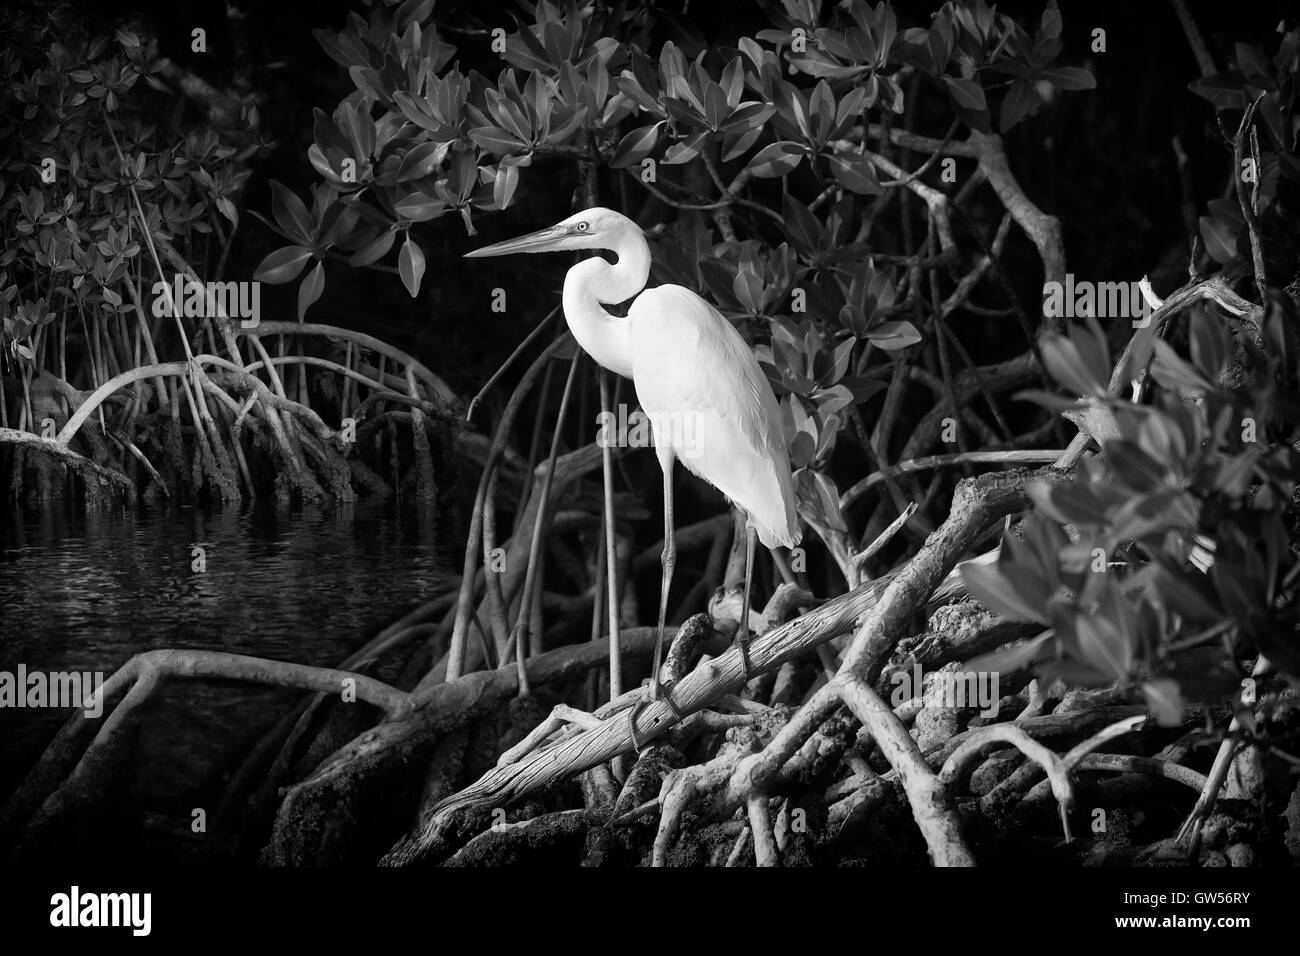 An elegant young Great White Heron perches amid mangrove prop roots along Key Largo Sound in this black and white image. Stock Photo